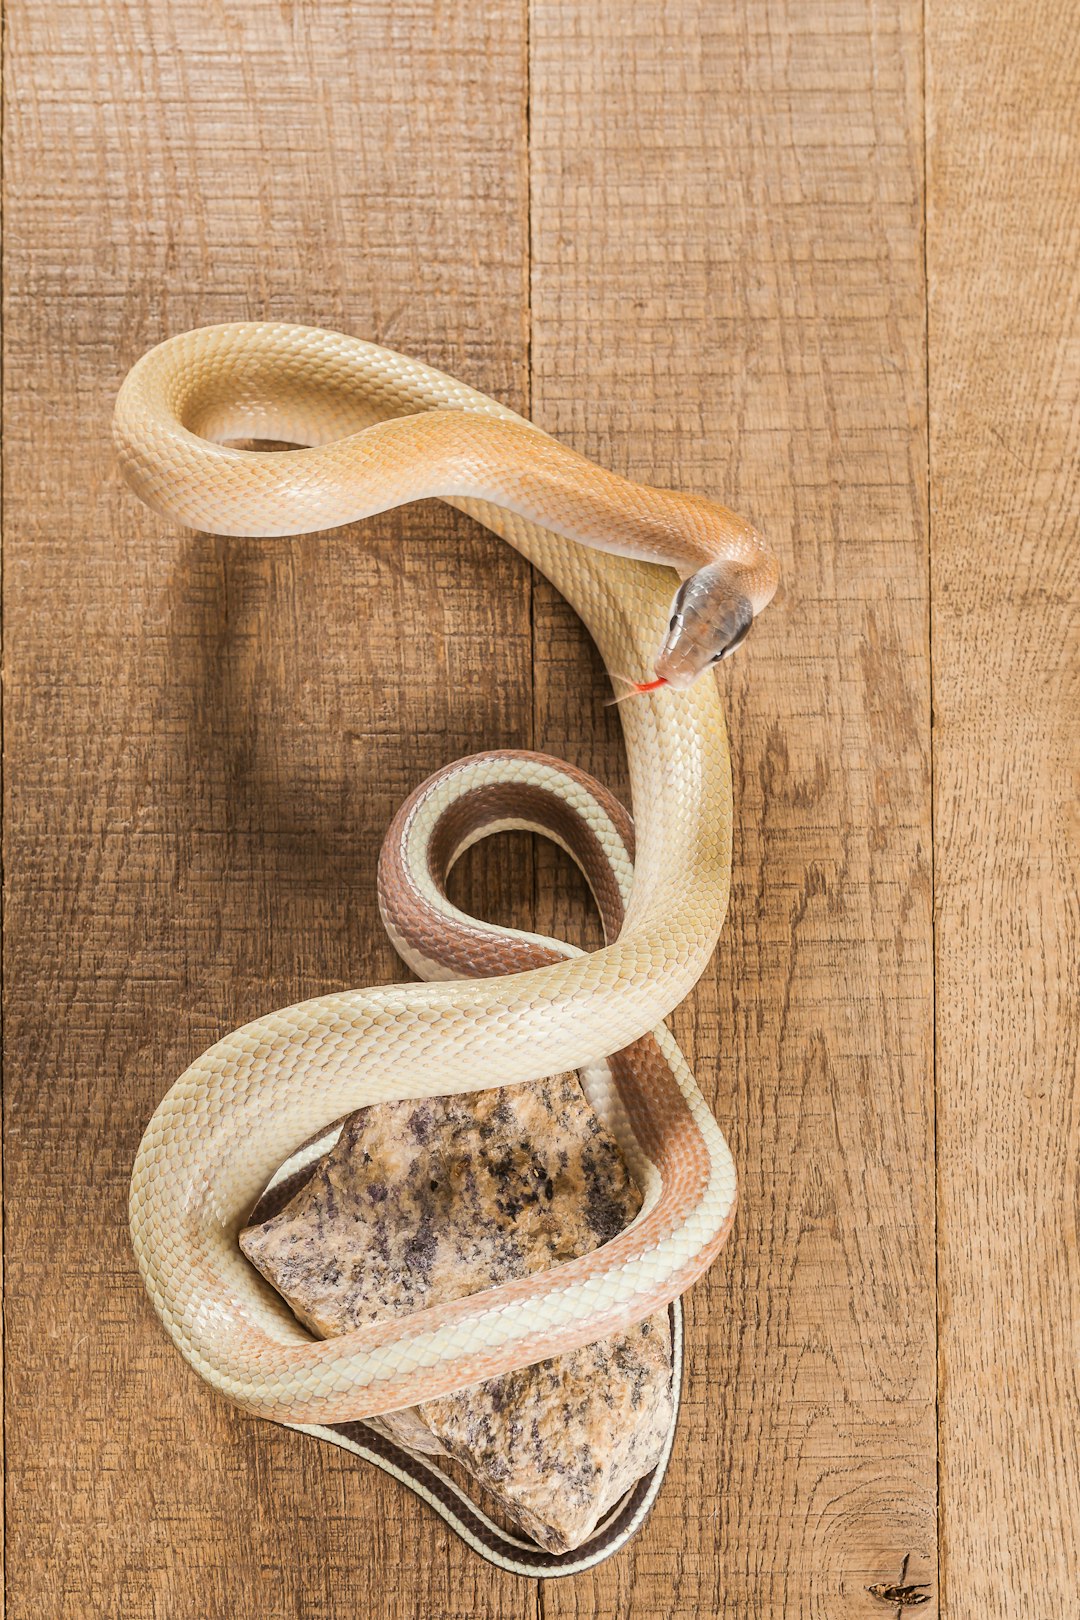 The beauty rat snake (Orthriophis taeniurus) is a species of snake that originally comes from South East Asia. I did photograph this snake during an animal photo event in a belgian animal shop where it is for sale.
The snake was put on a wooden oak plank and shot from the top. The rock was put so the snake would be circling around it.